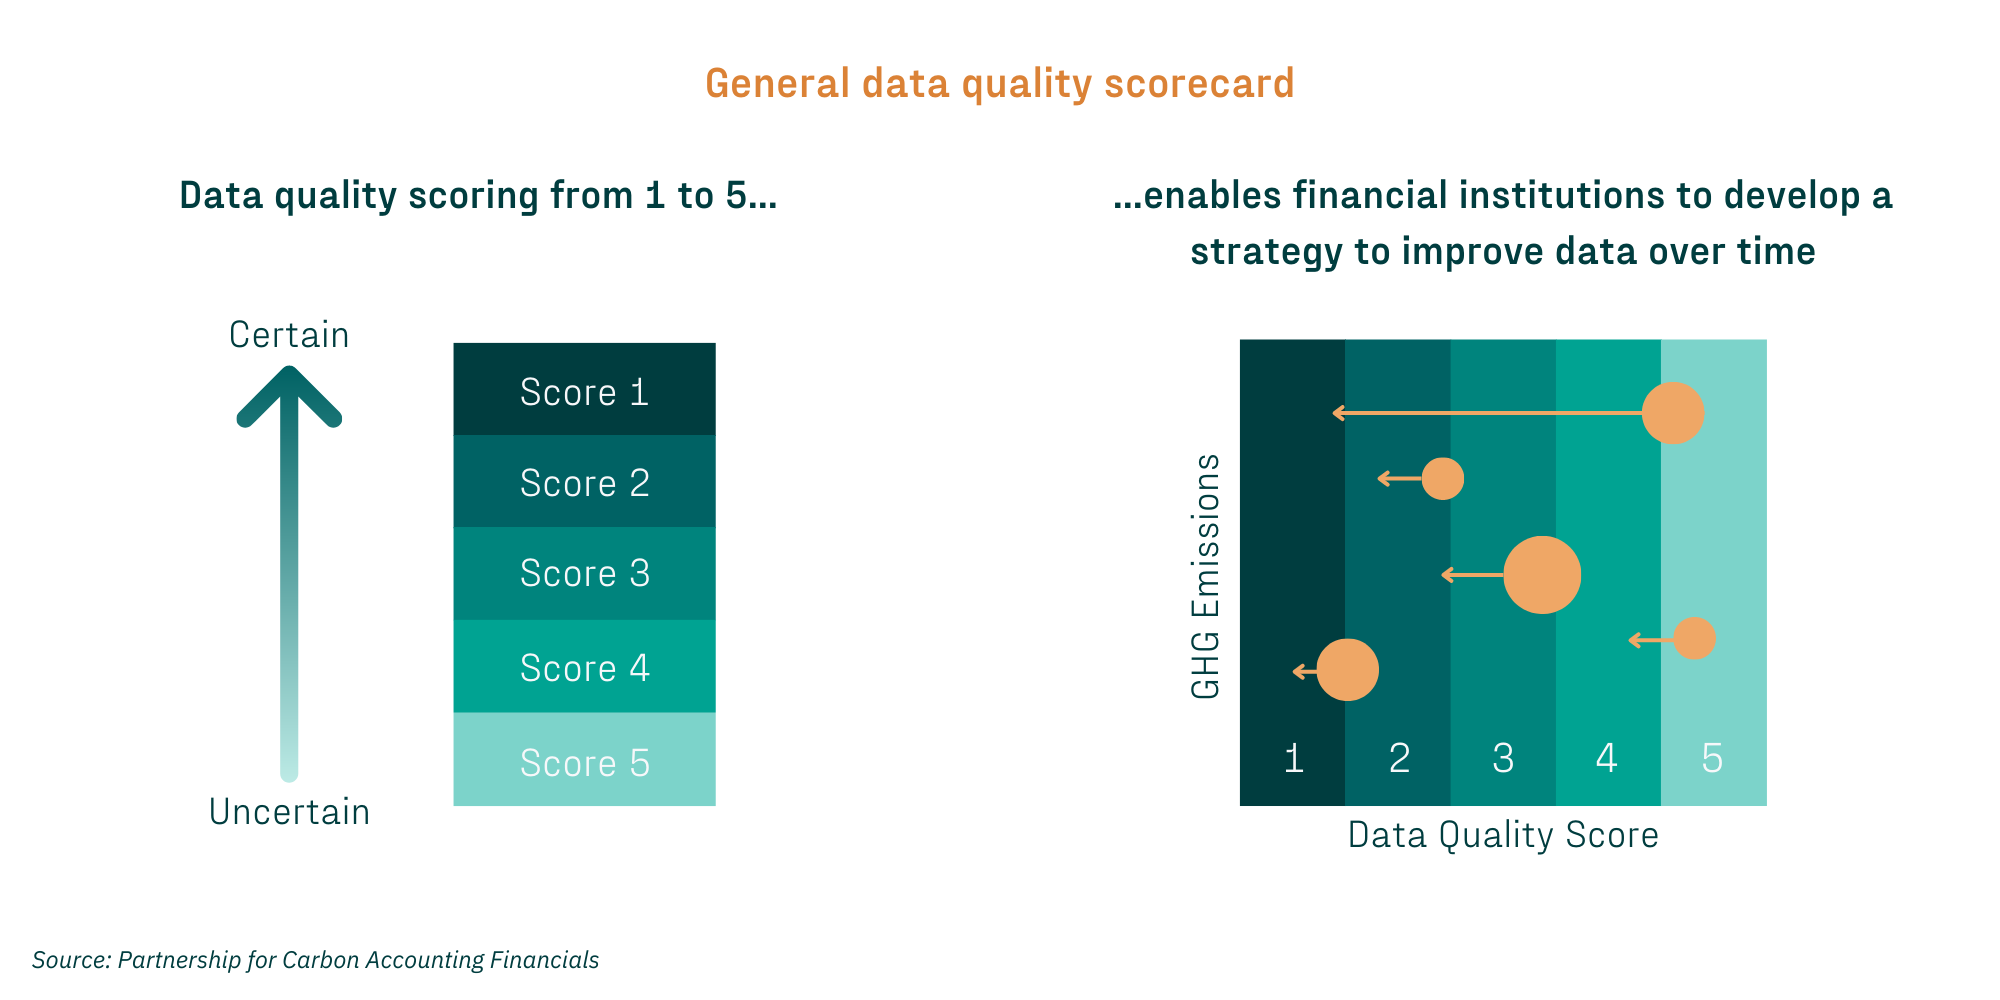 General data quality scorecard example. Displays PCAF score 5 (uncertain) through to PCAF score 1 (certain) with text: 'Data quality scoring from 1 to 5 enables financial institutions to develop a strategy to improve data over time.' Source: Partnership for Carbon Accounting Financials